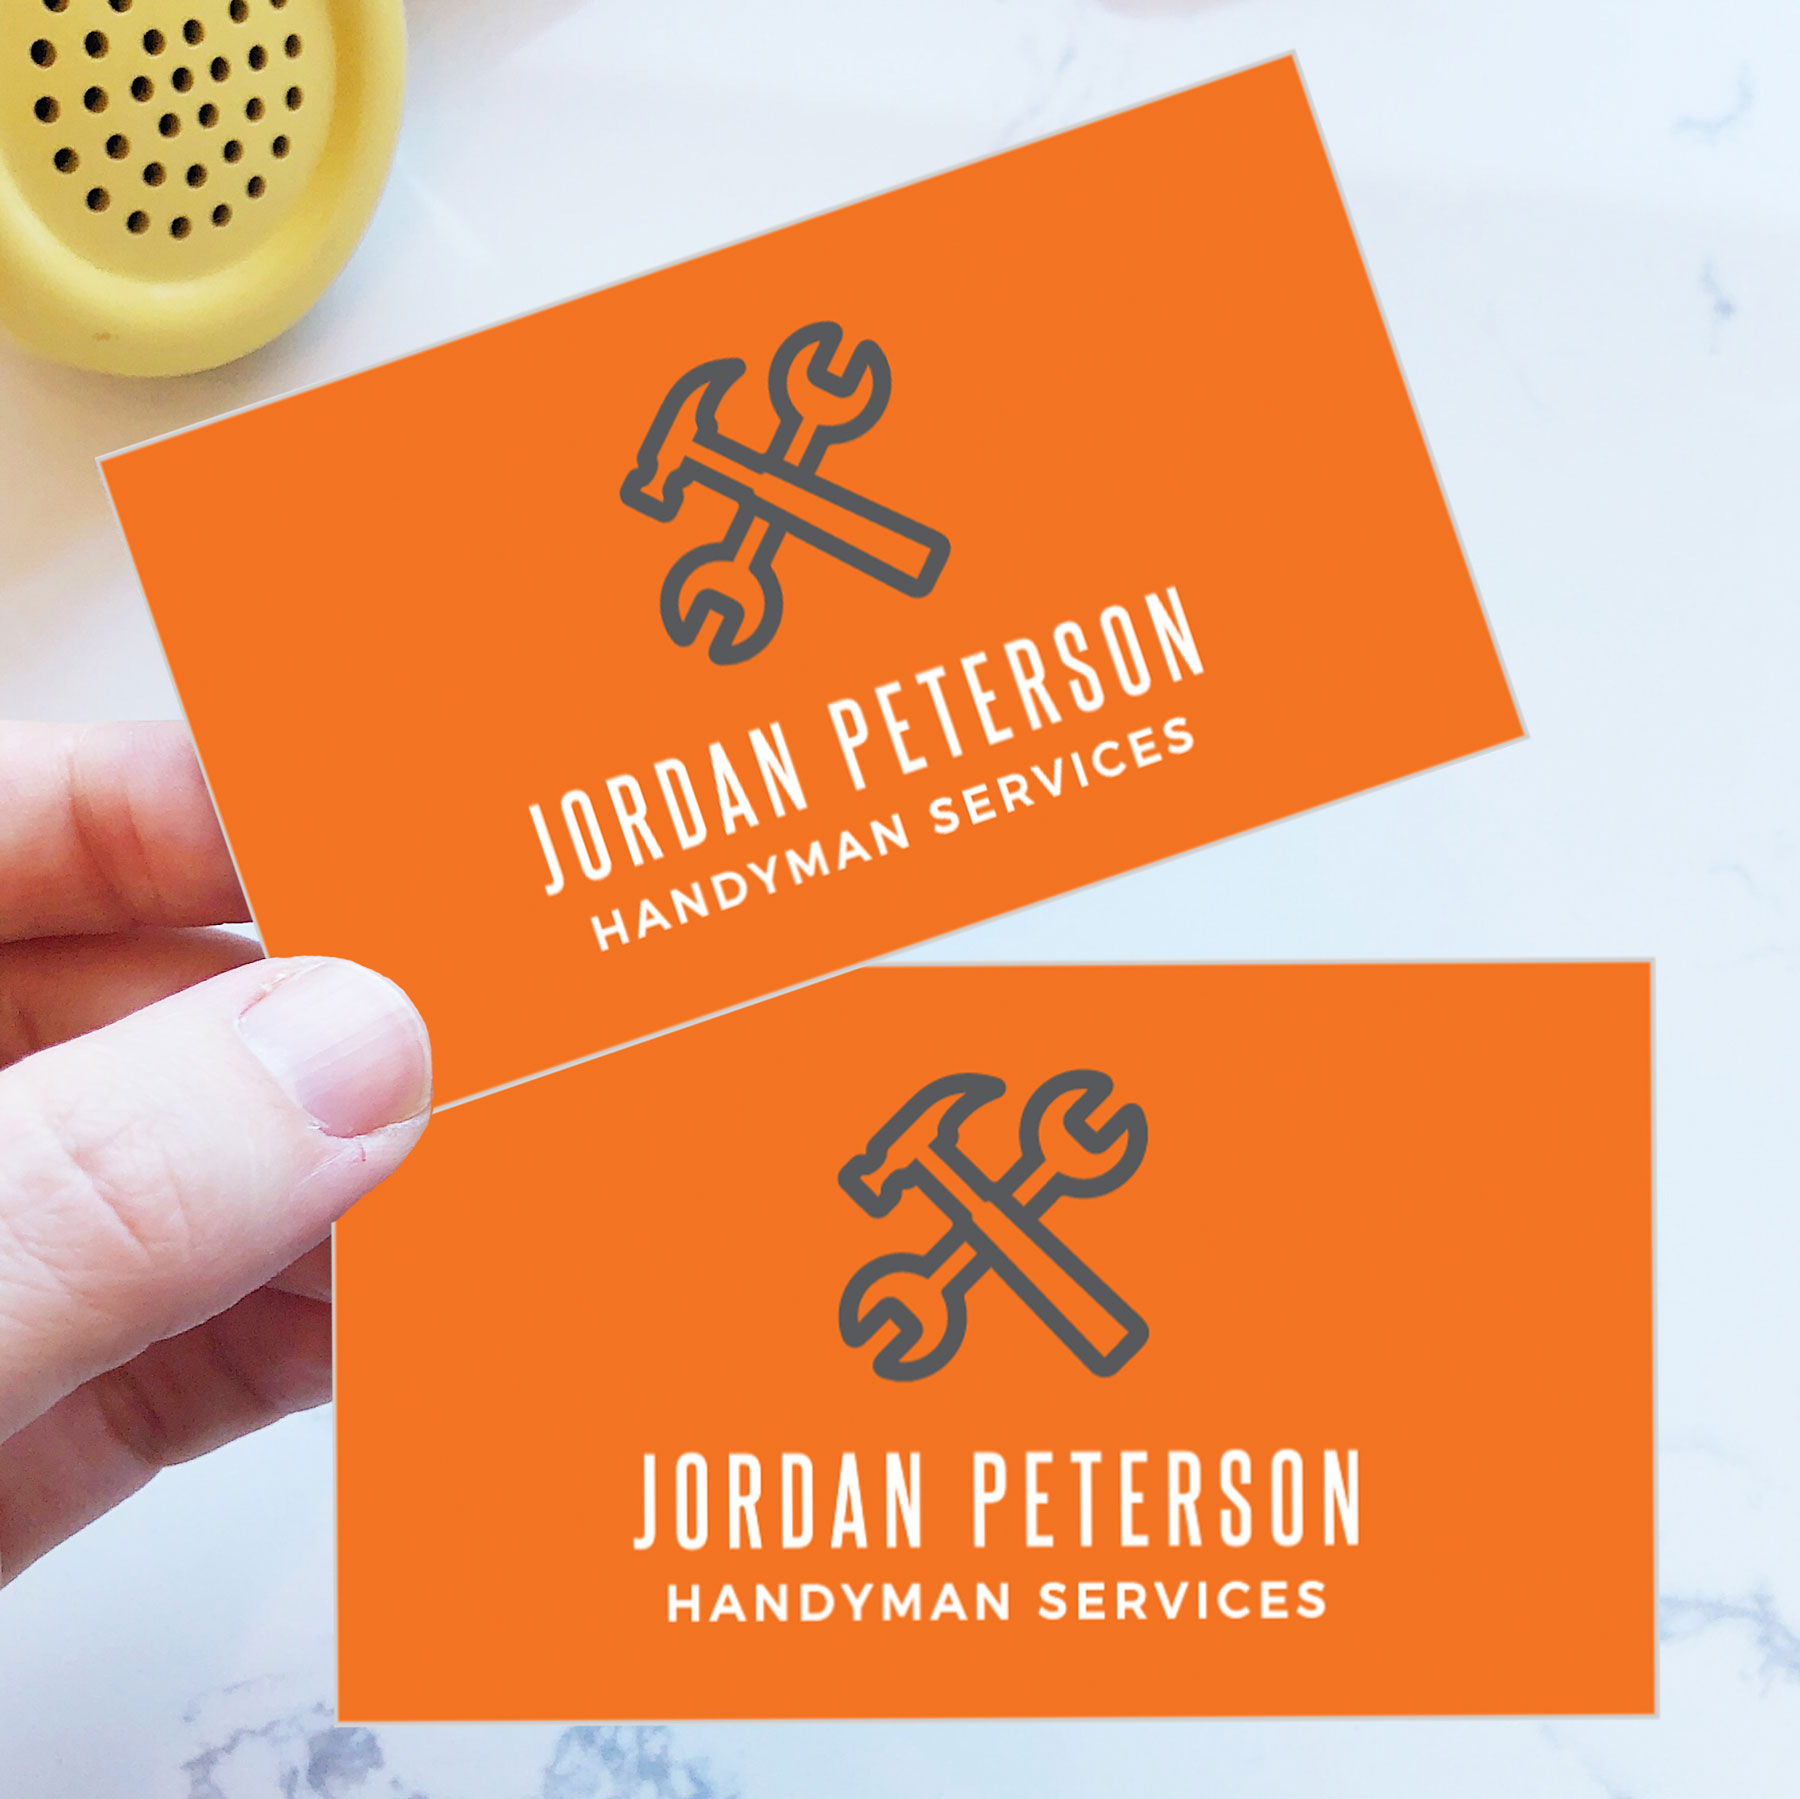 Handyman Business Cards: The perfect promotional tool for ...